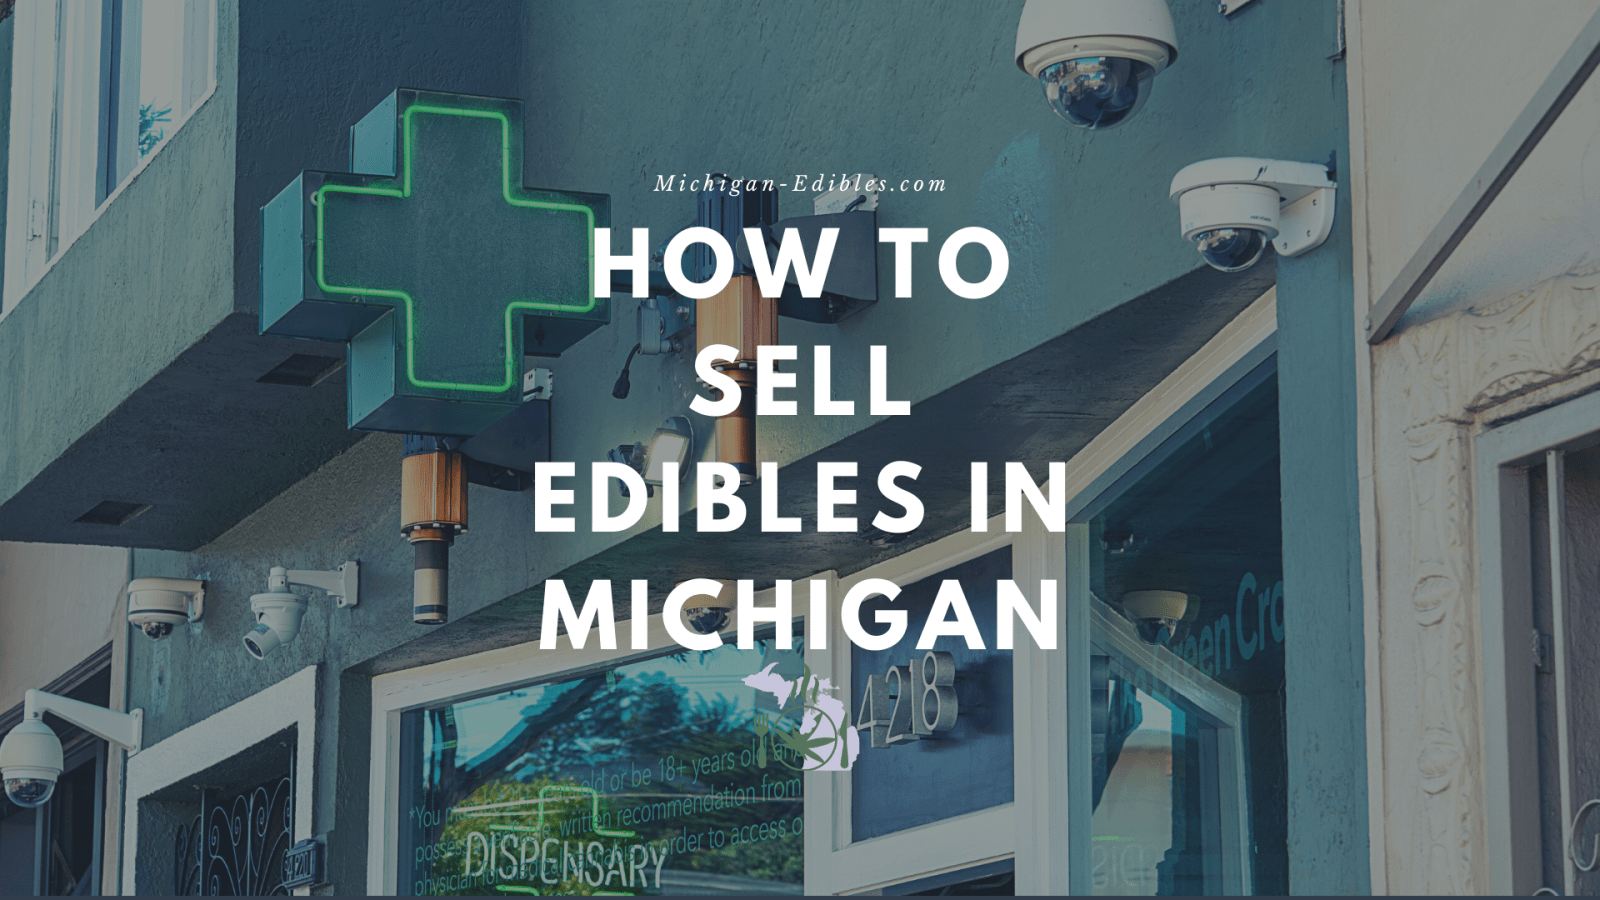 Blog post of how to sell edibles in Michigan at www.michigan-edibles.com